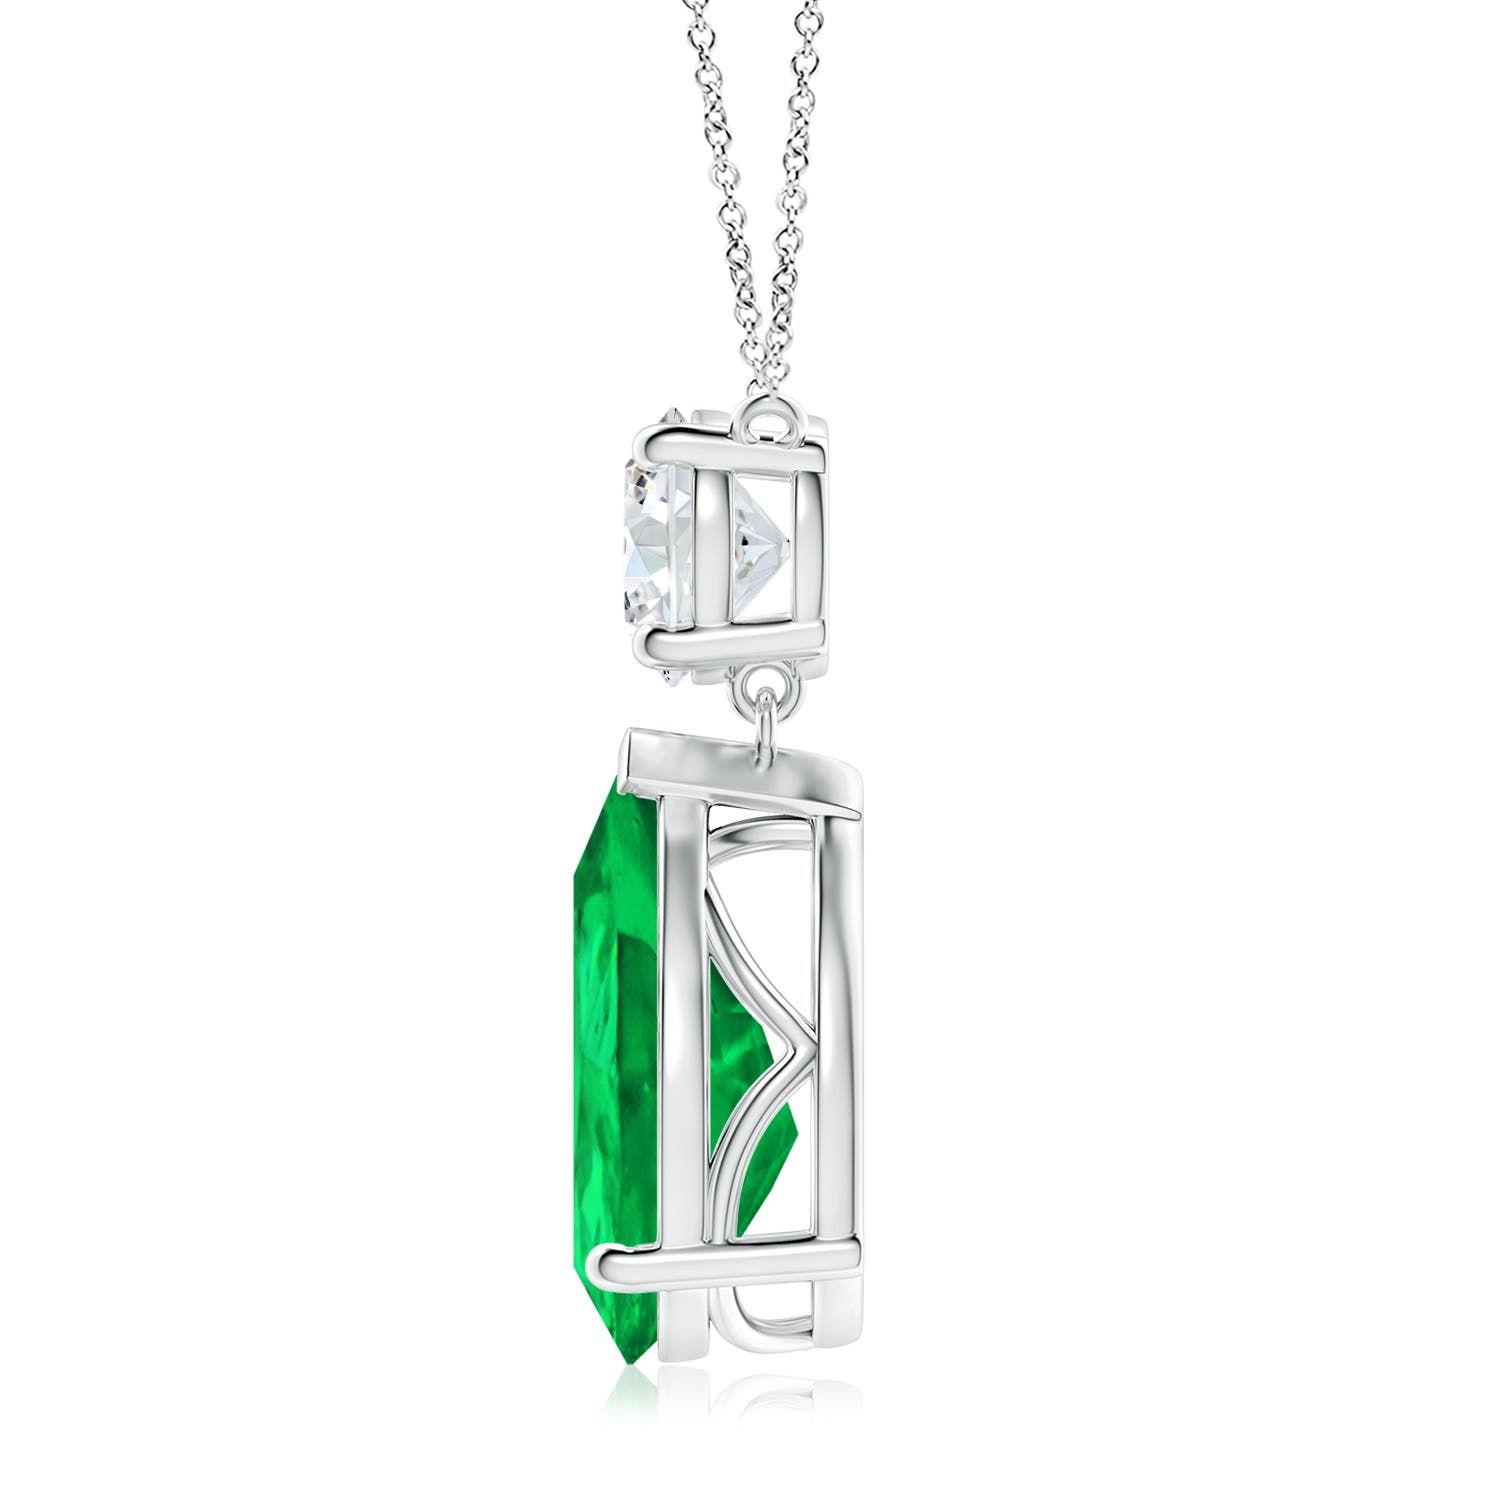 AAA - Emerald / 7.6 CT / 14 KT White Gold